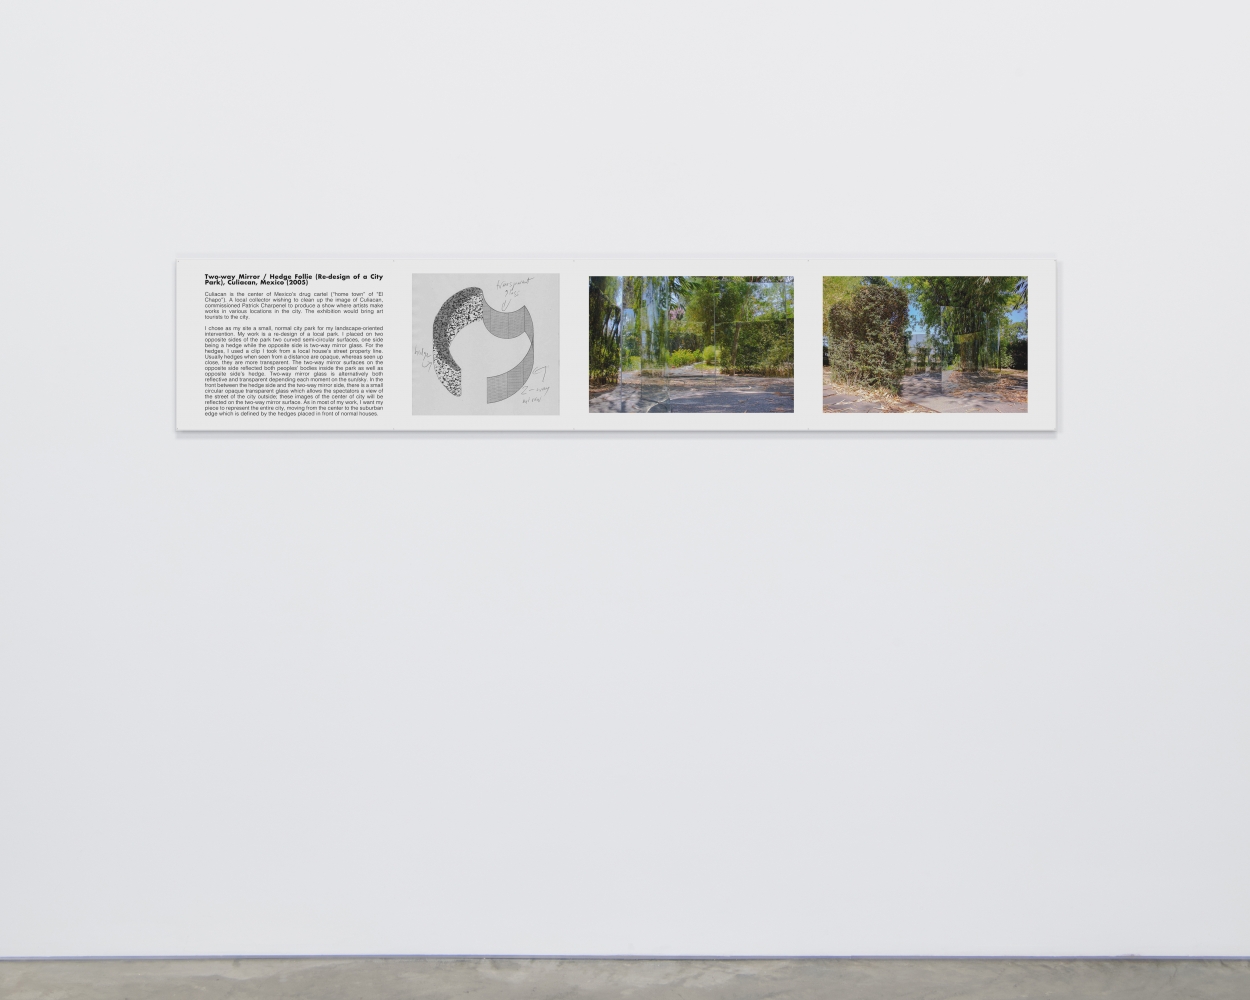 Dan Graham

Two-way Mirror / Hedge Follie (Re-design of a City Park), Culiacan, Mexico

2005-2020

Digital inkjet print

15 1/8 x 77 1/2 inches (38.4 x 196.9 cm)

Variation of 5

DG 115

$10,000

&amp;nbsp;

INQUIRE